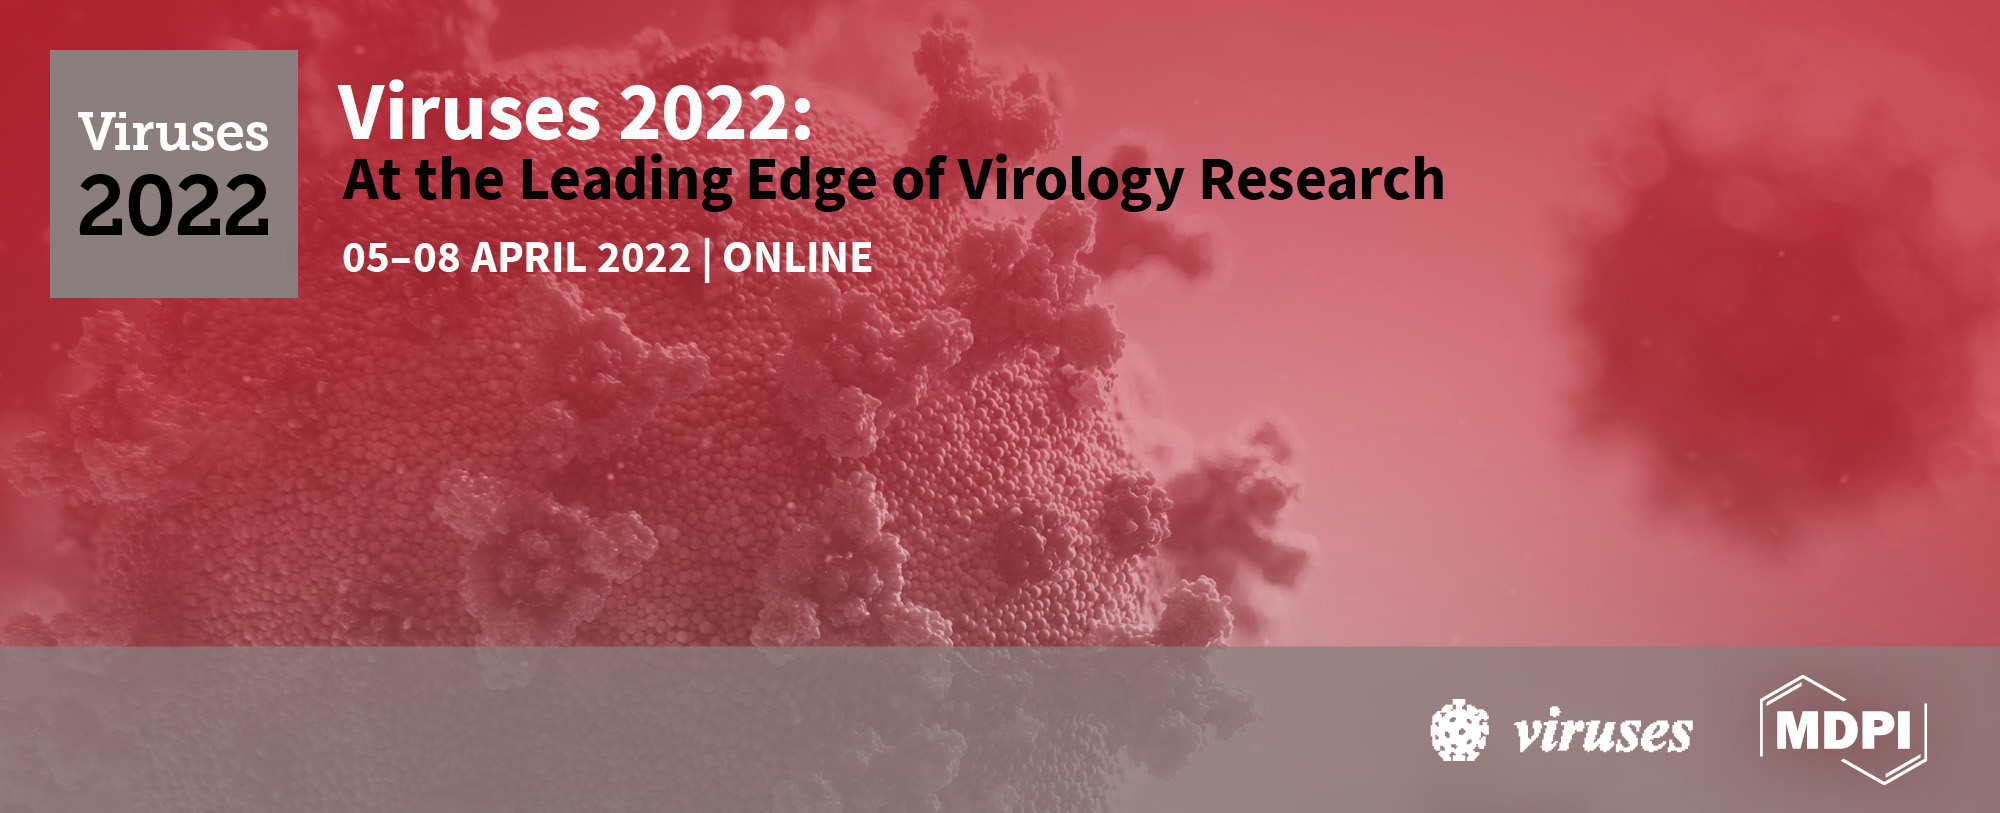 Viruses 2022—At the Leading Edge of Virology Research